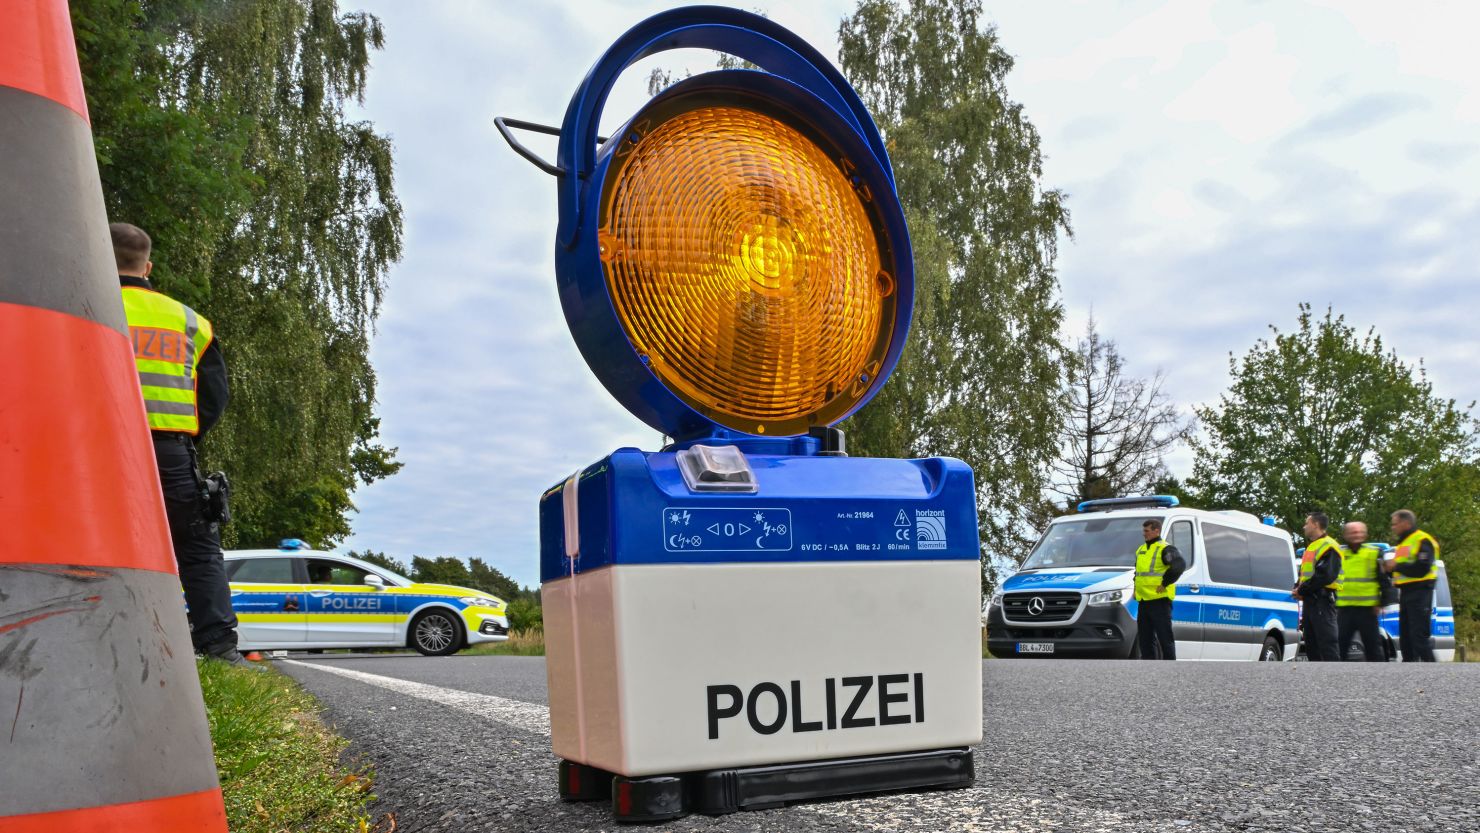 A warning signal stands on the road during a police check against the smuggling of migrants in Germany, September 25, 2023.